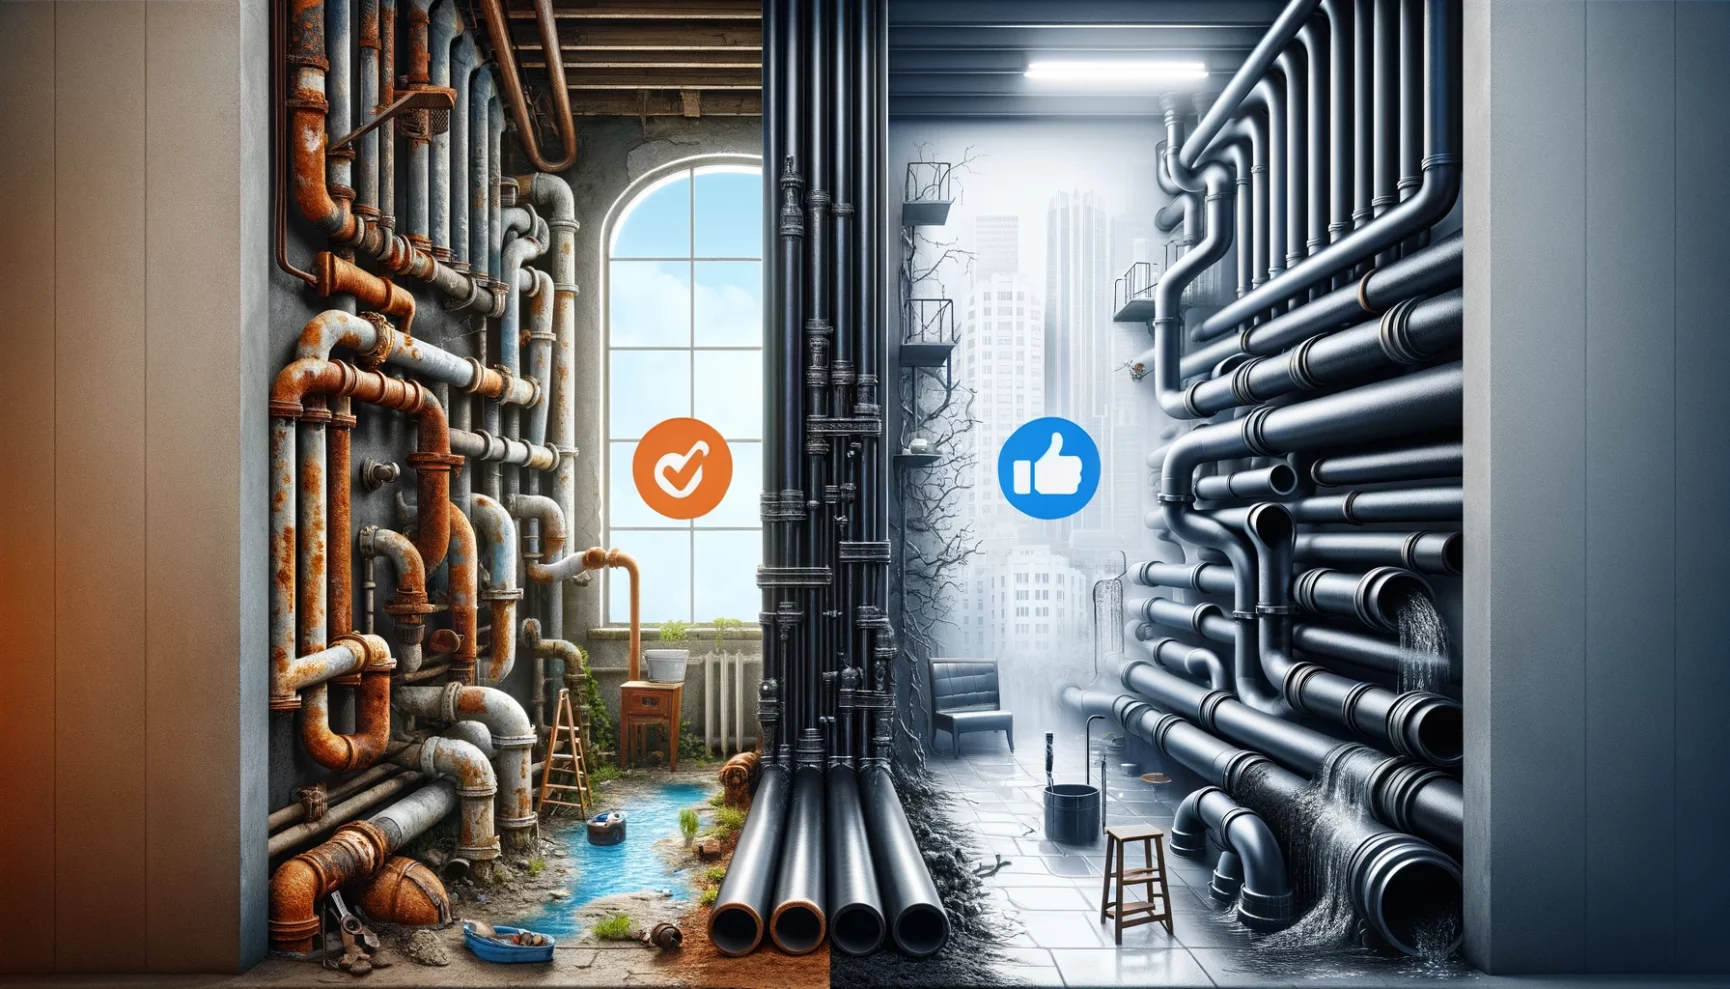 A surreal room divided into two contrasting sections, one cluttered with rusty, old pipes and the other with sleek, modern piping, featuring symbolic 'like' and 'approve' icons.